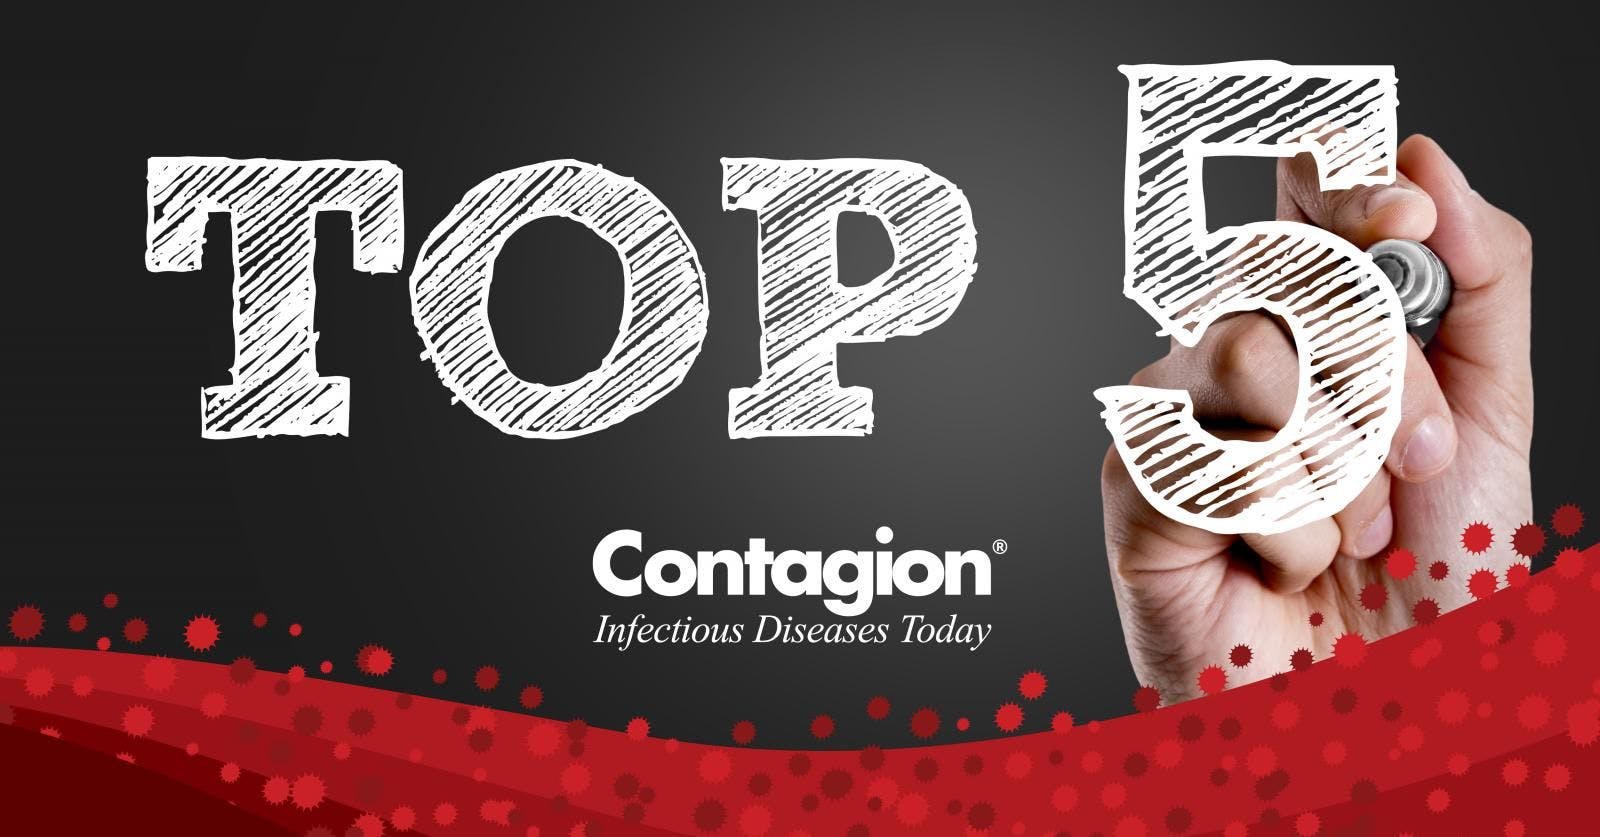 Top Infectious Disease News of the Week&mdash;July 21, 2019